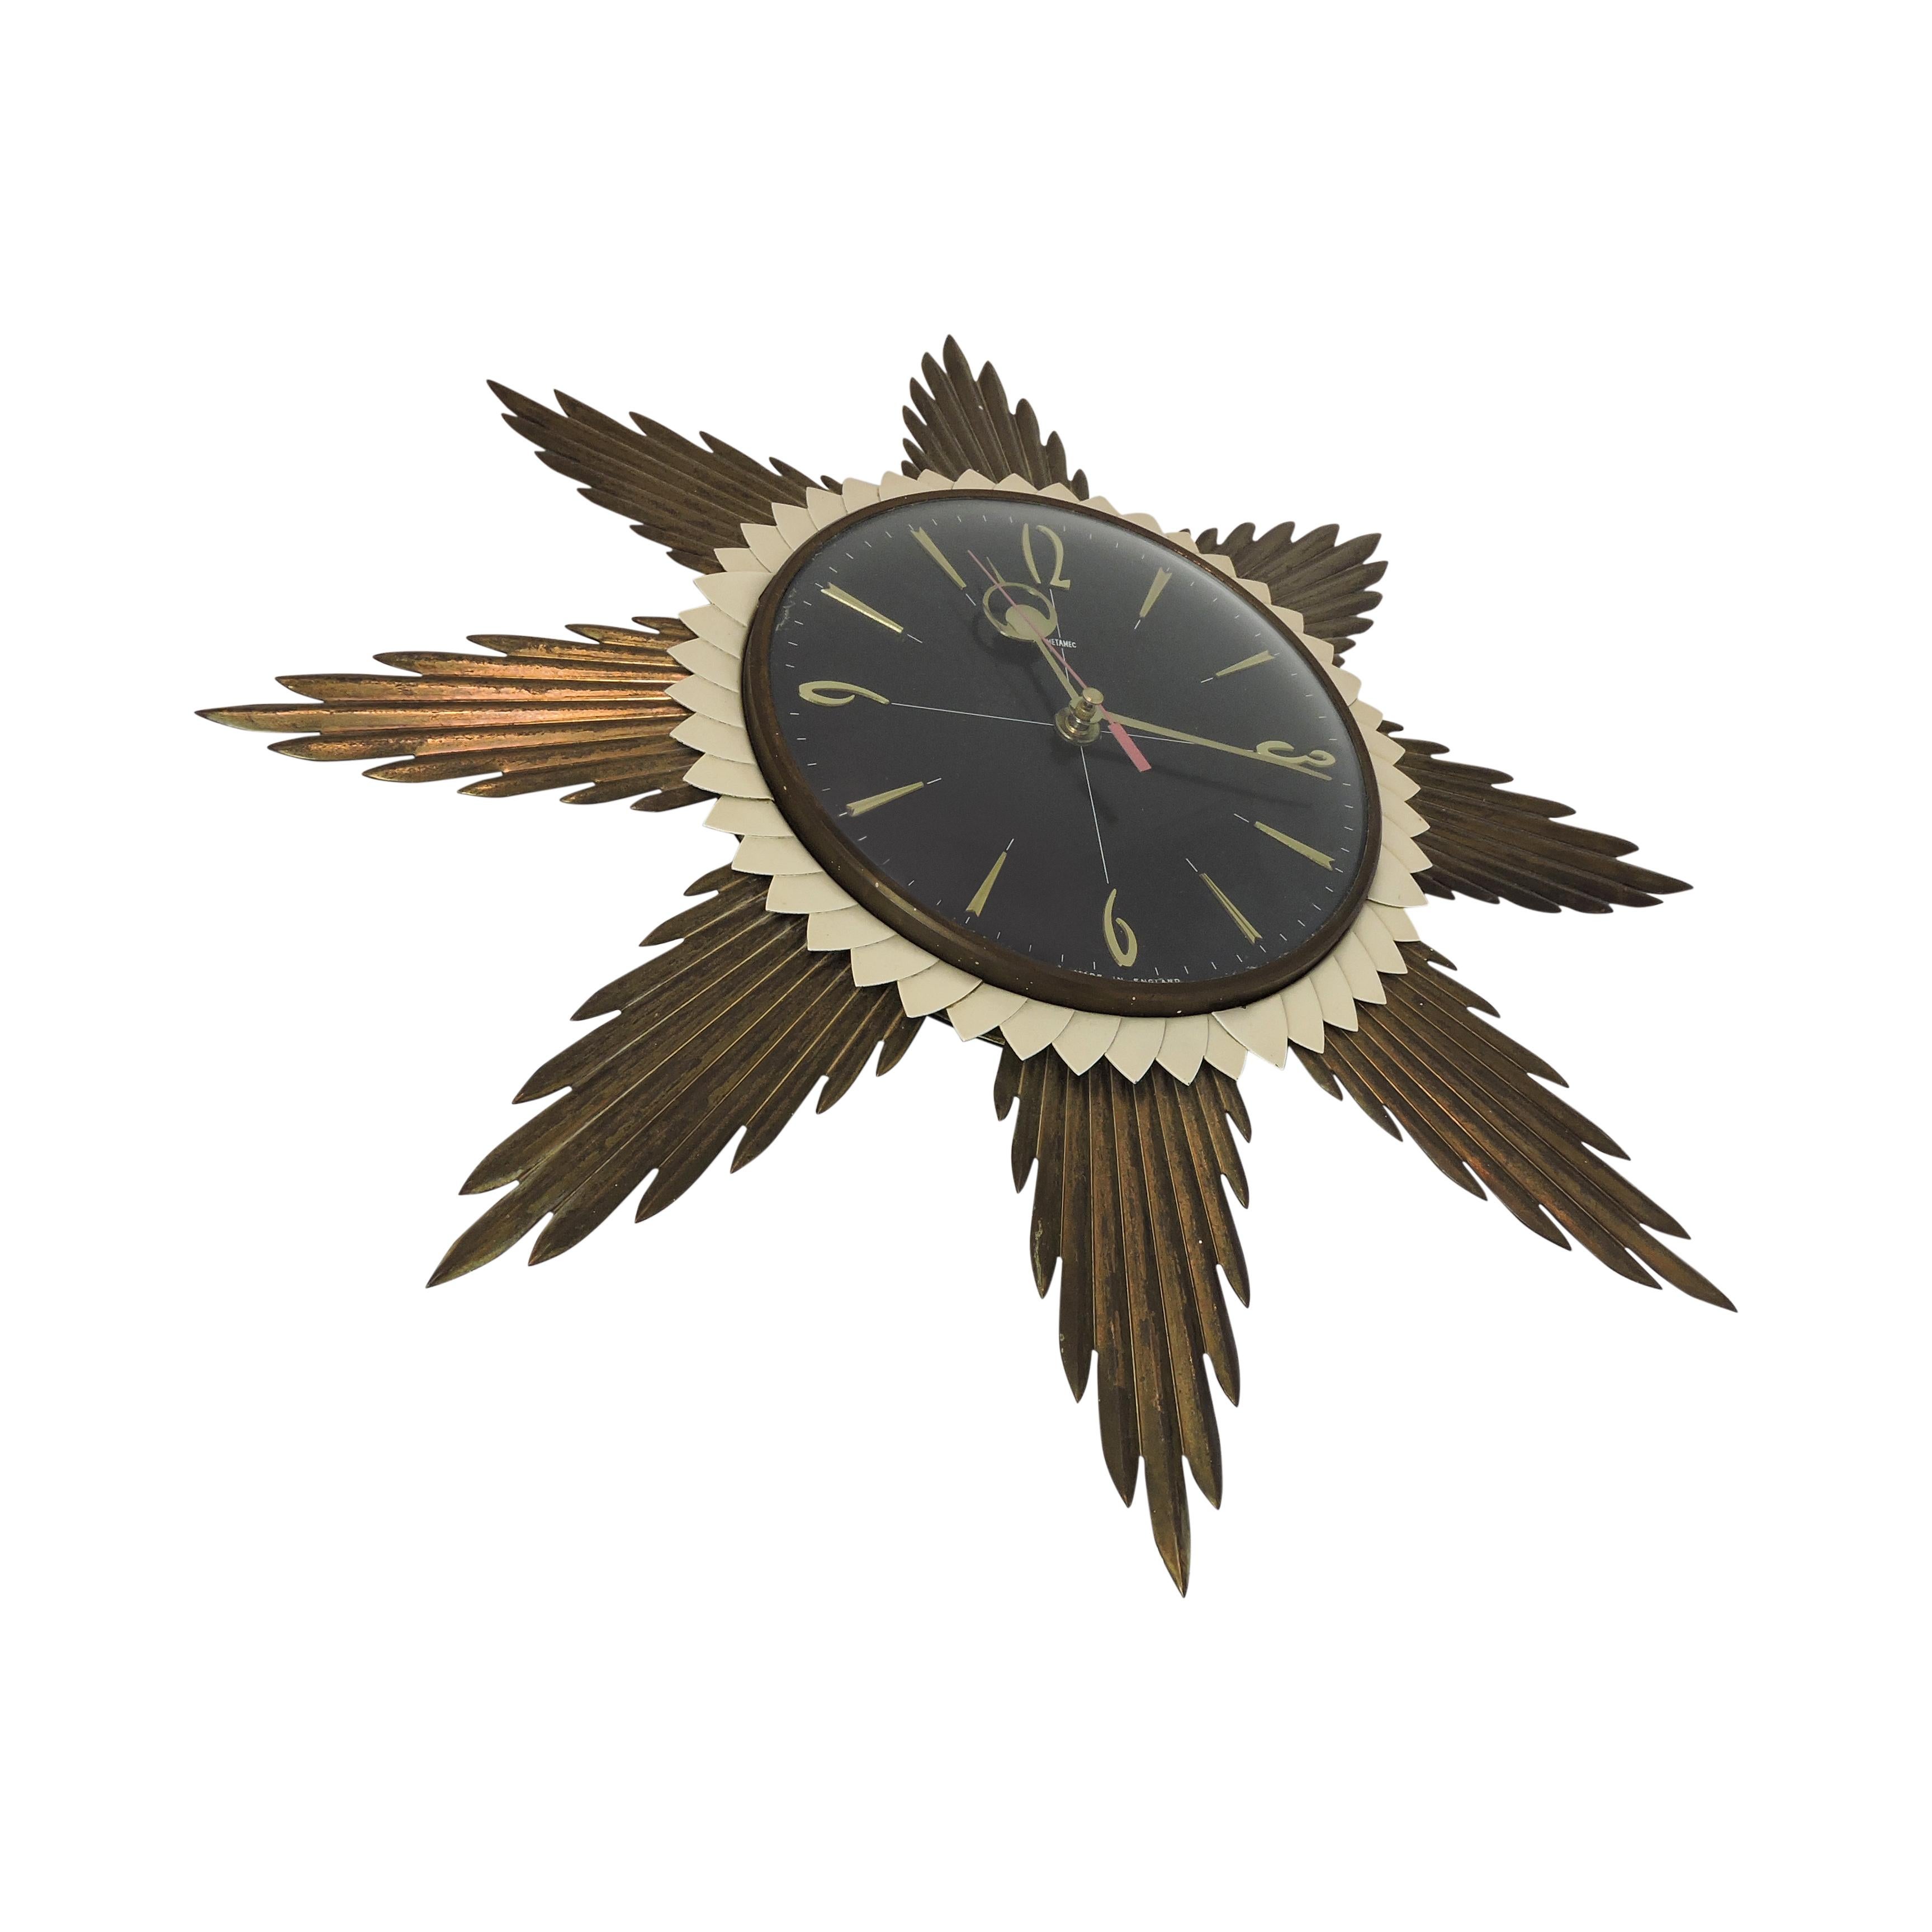 This wall clock with a sun-themed shape was made by Metamec in the UK in the 1960s. It has been updated with quartz movement.
 